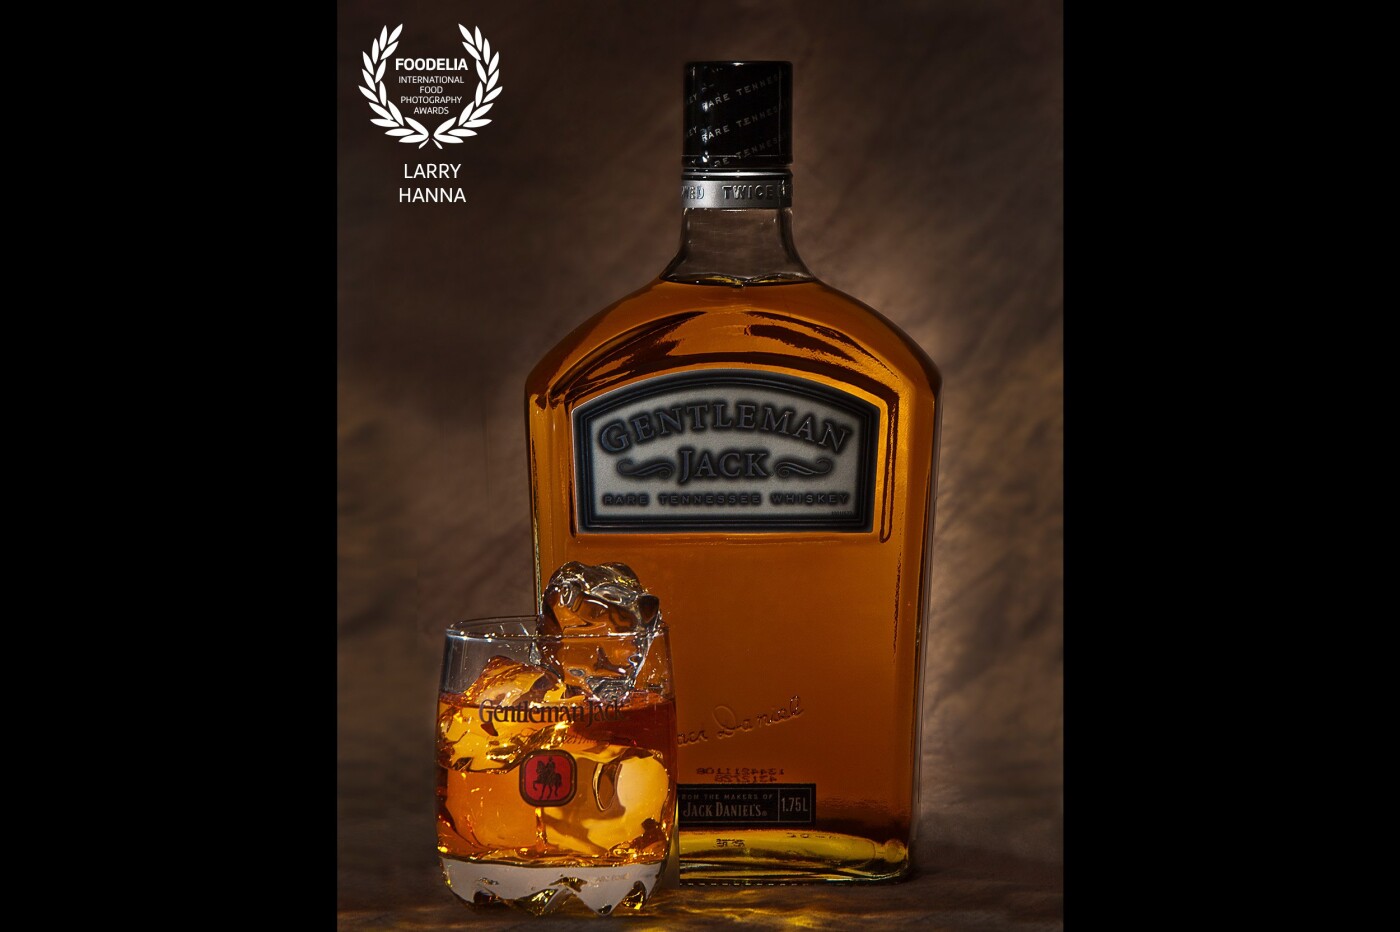 Gentleman Jack is a very smooth bourbon whiskey that is my drink of choice. I photographed this in my home studio backlighting the bourbon to show its color.